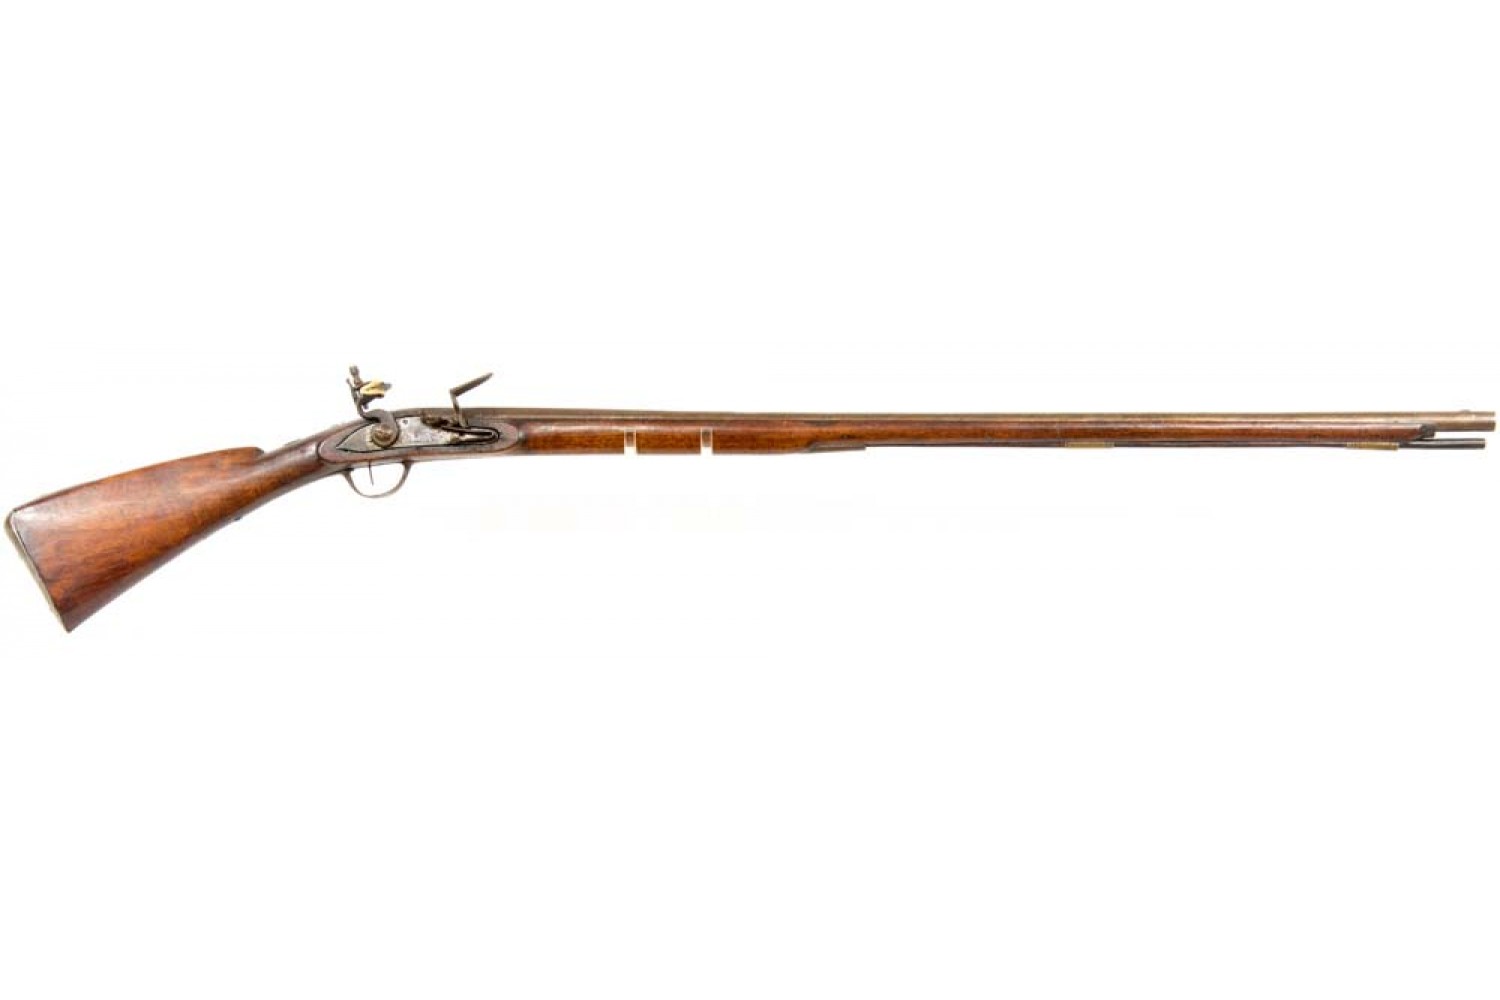 American Restocked French Fusil de Chasse